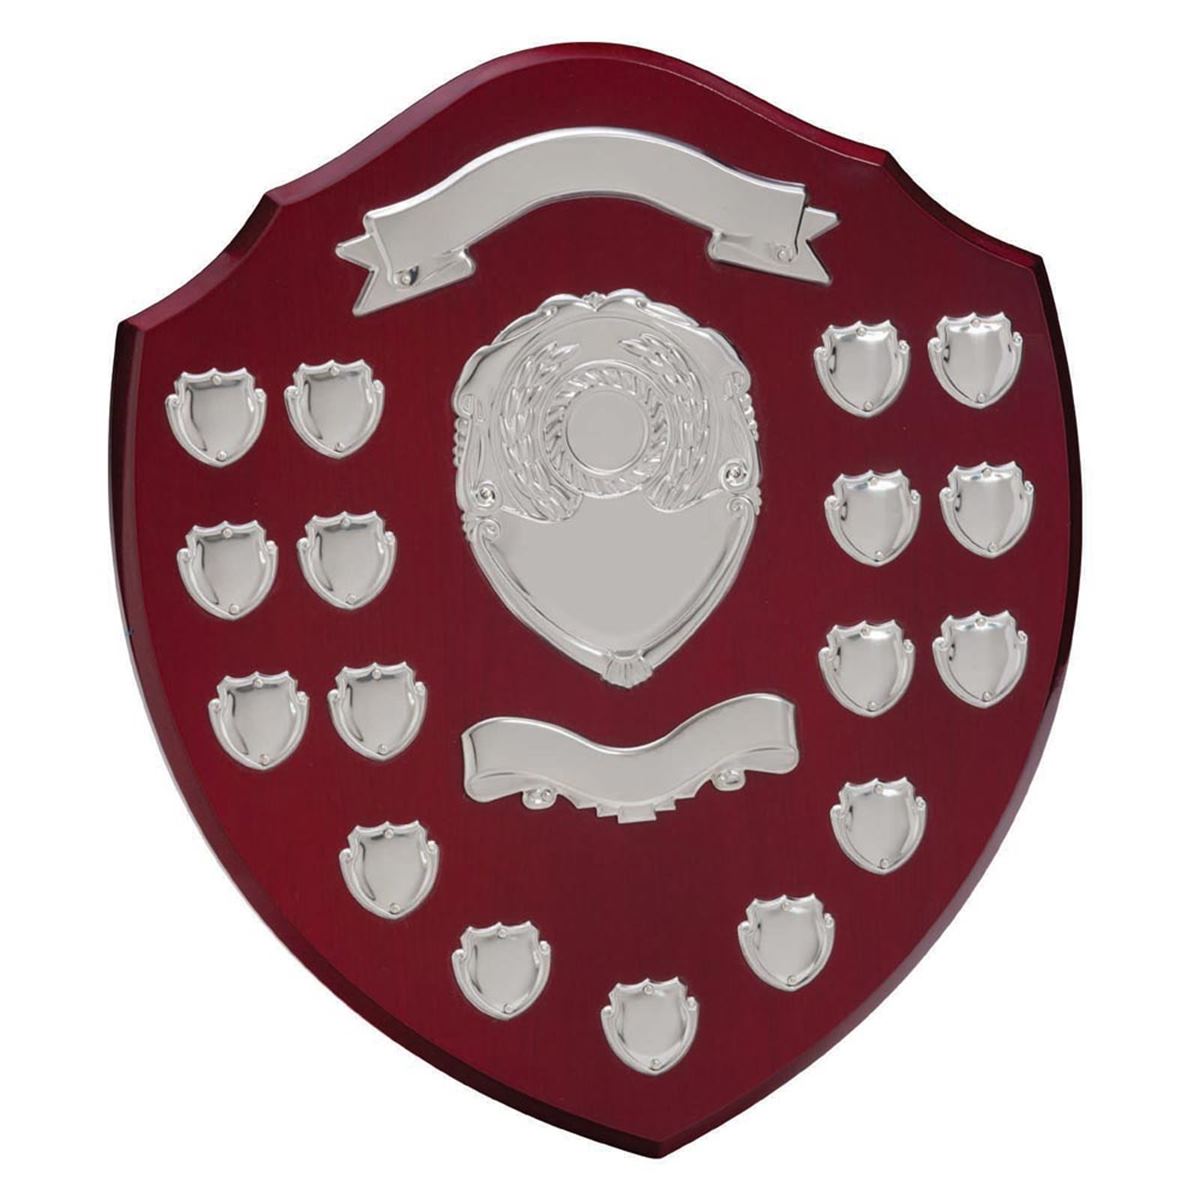 The Supreme Rosewood Annual Shield Award - 17 Side Shields